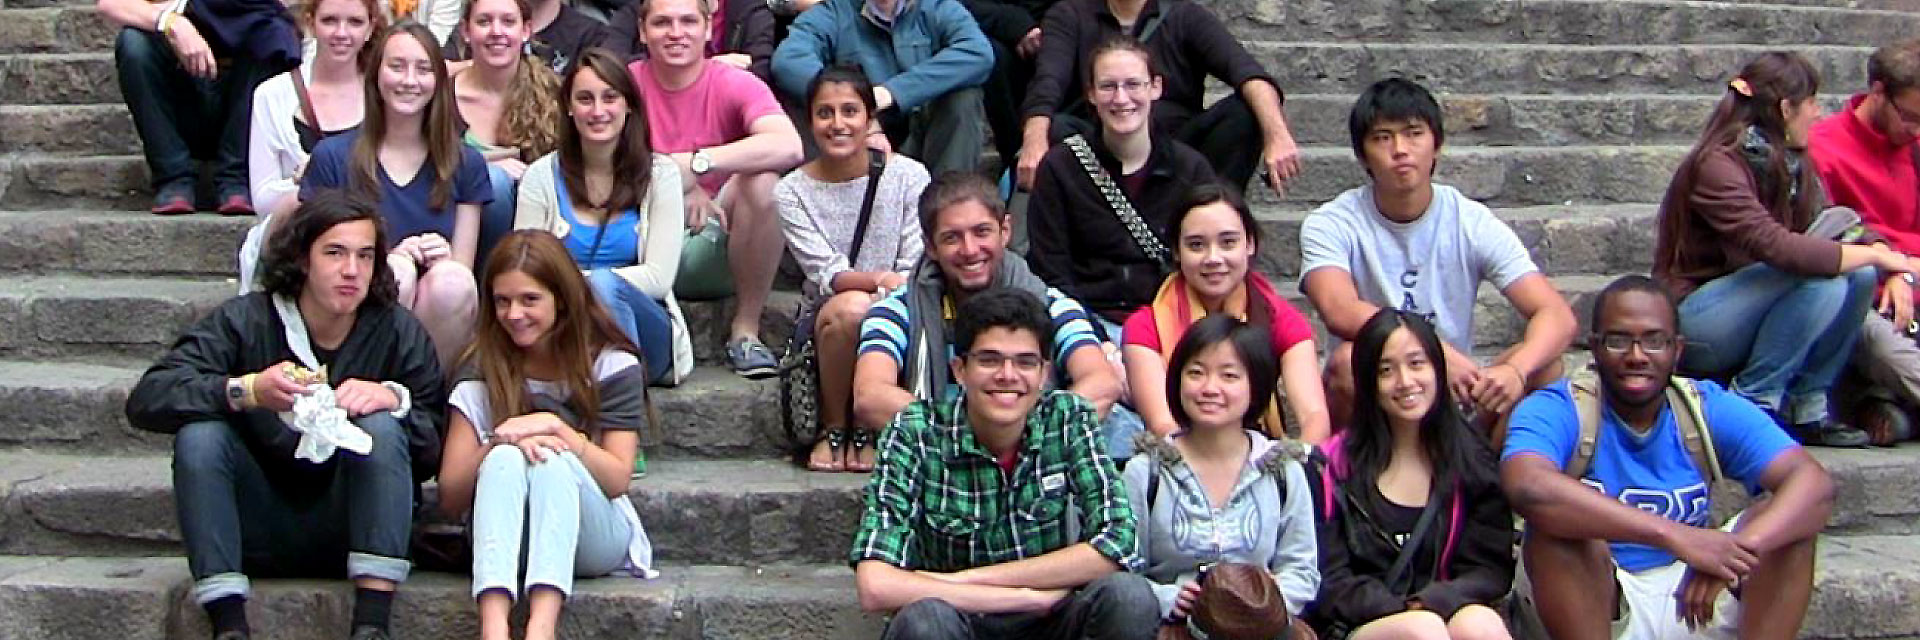 Students studying abroad pose on stone steps in Barcelona, Spain.